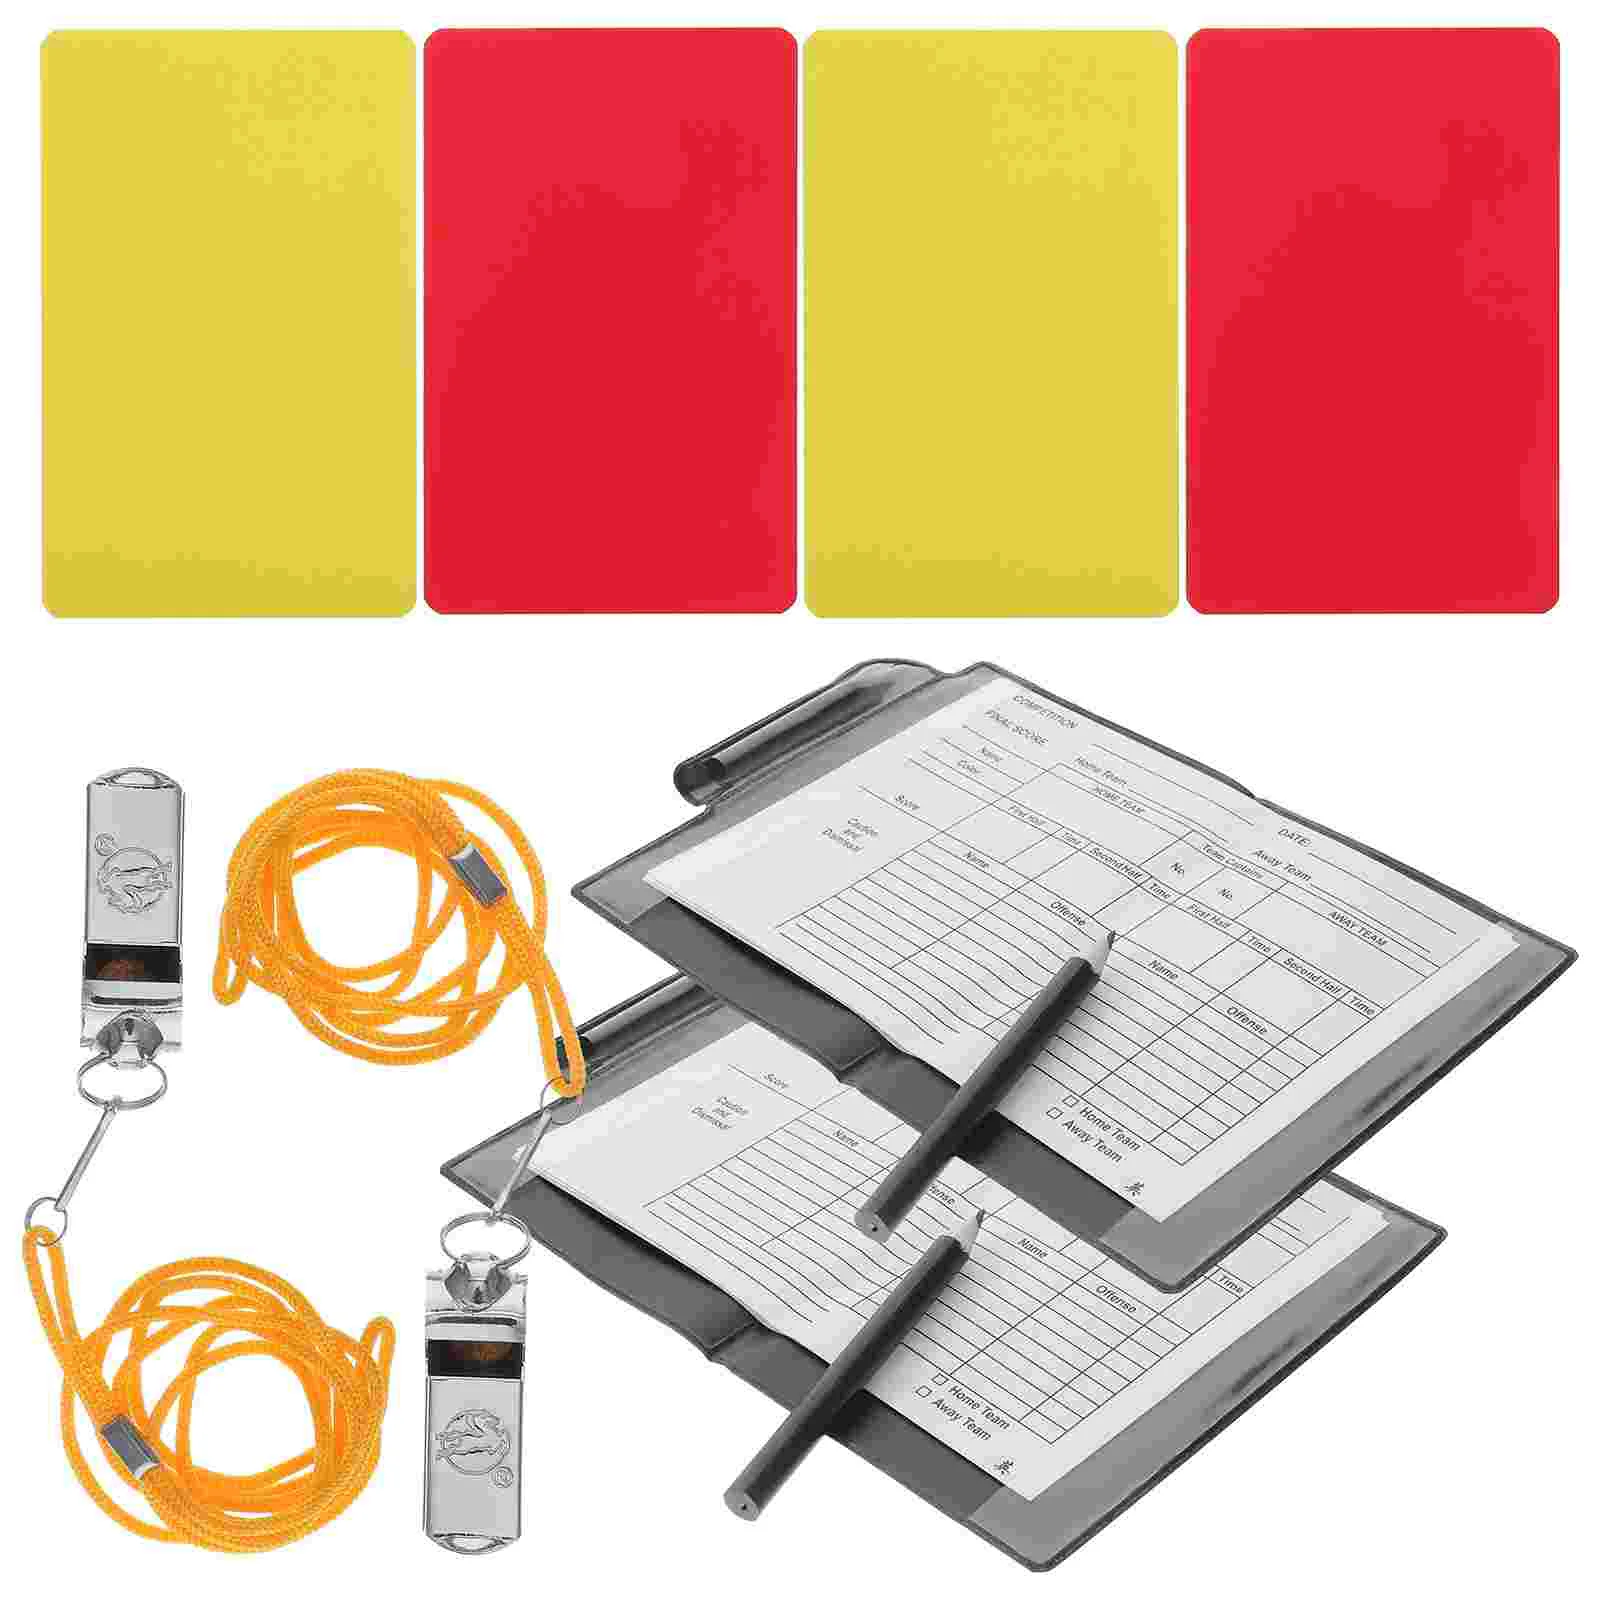 Inoomp Metal Wallet Cards Referee Kit Red Yellow Whistle Score Pads Pencils Football Soccer Sweat Suit